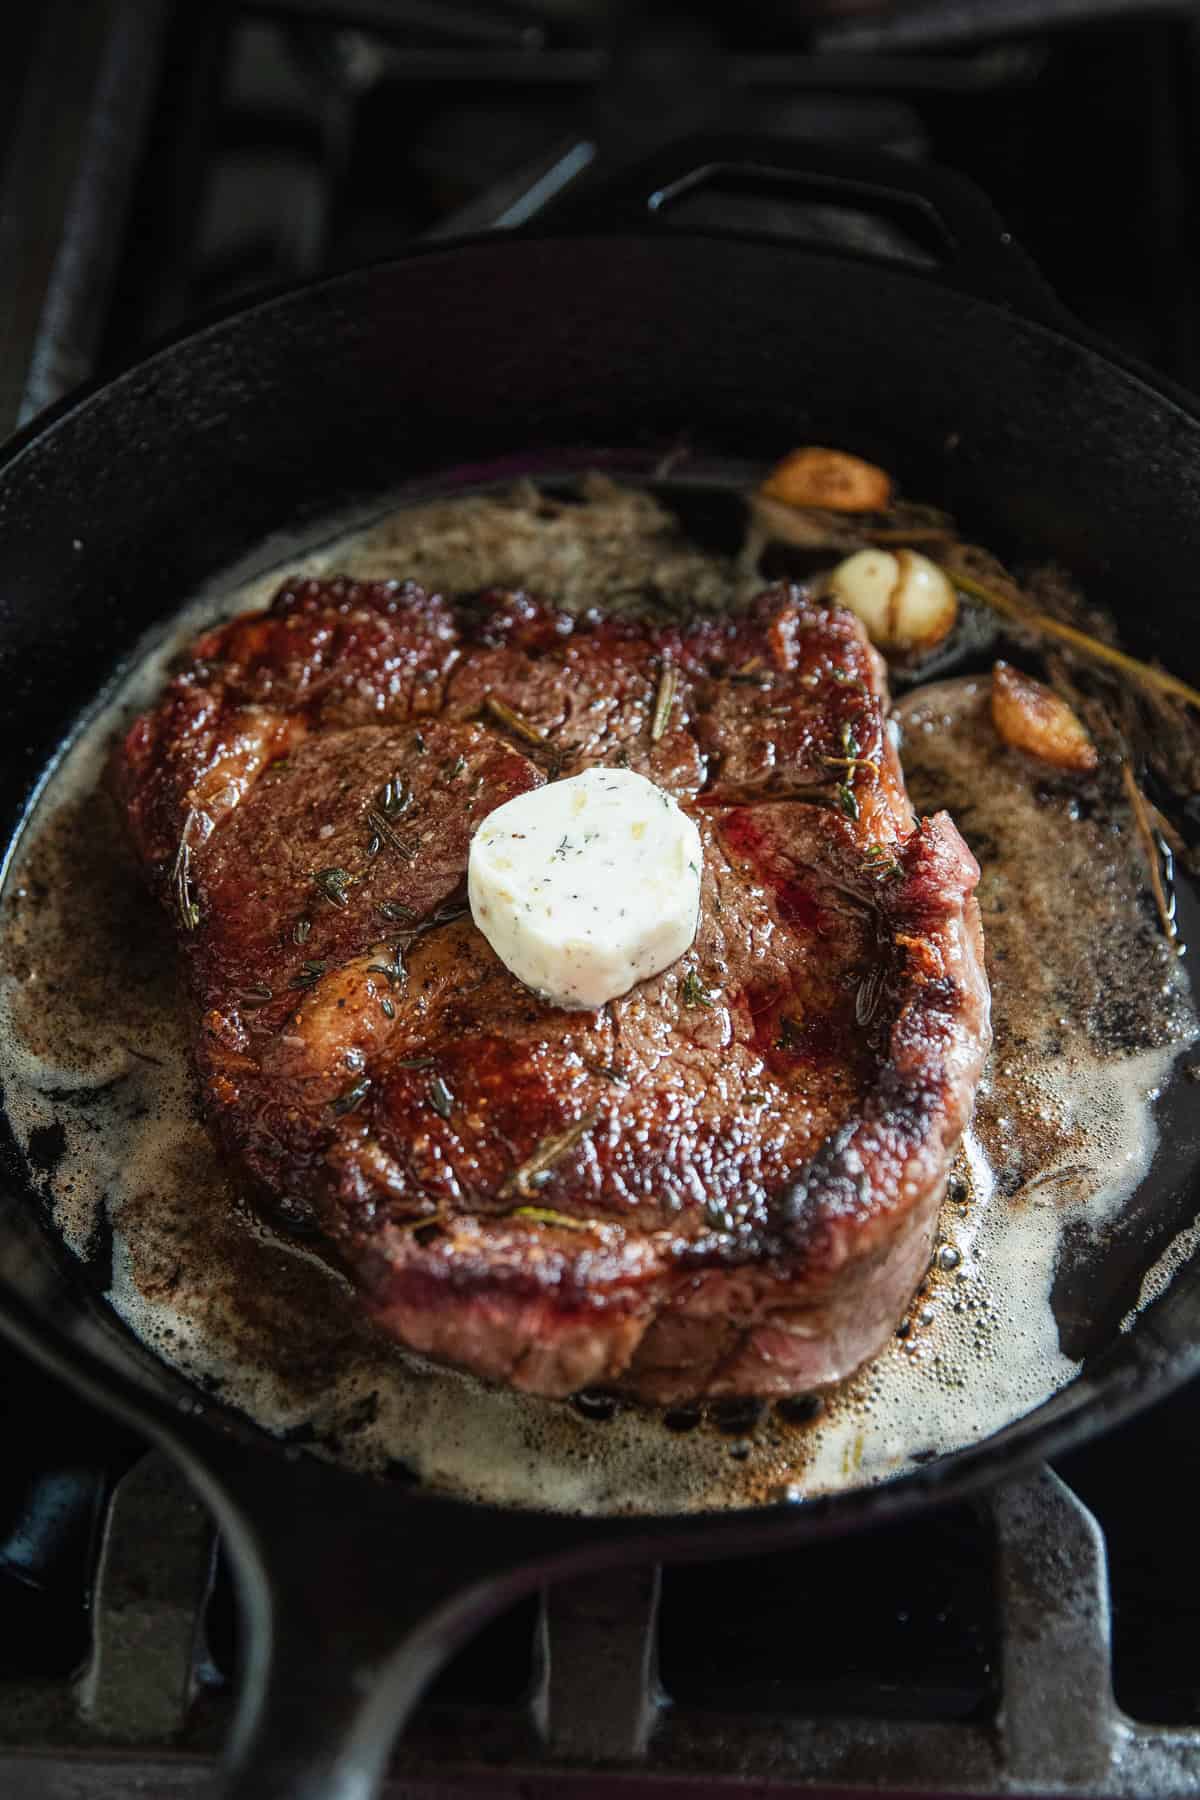 A ribeye steak cooking in a cast iron skillet with herb and garlic butter on top of steak.